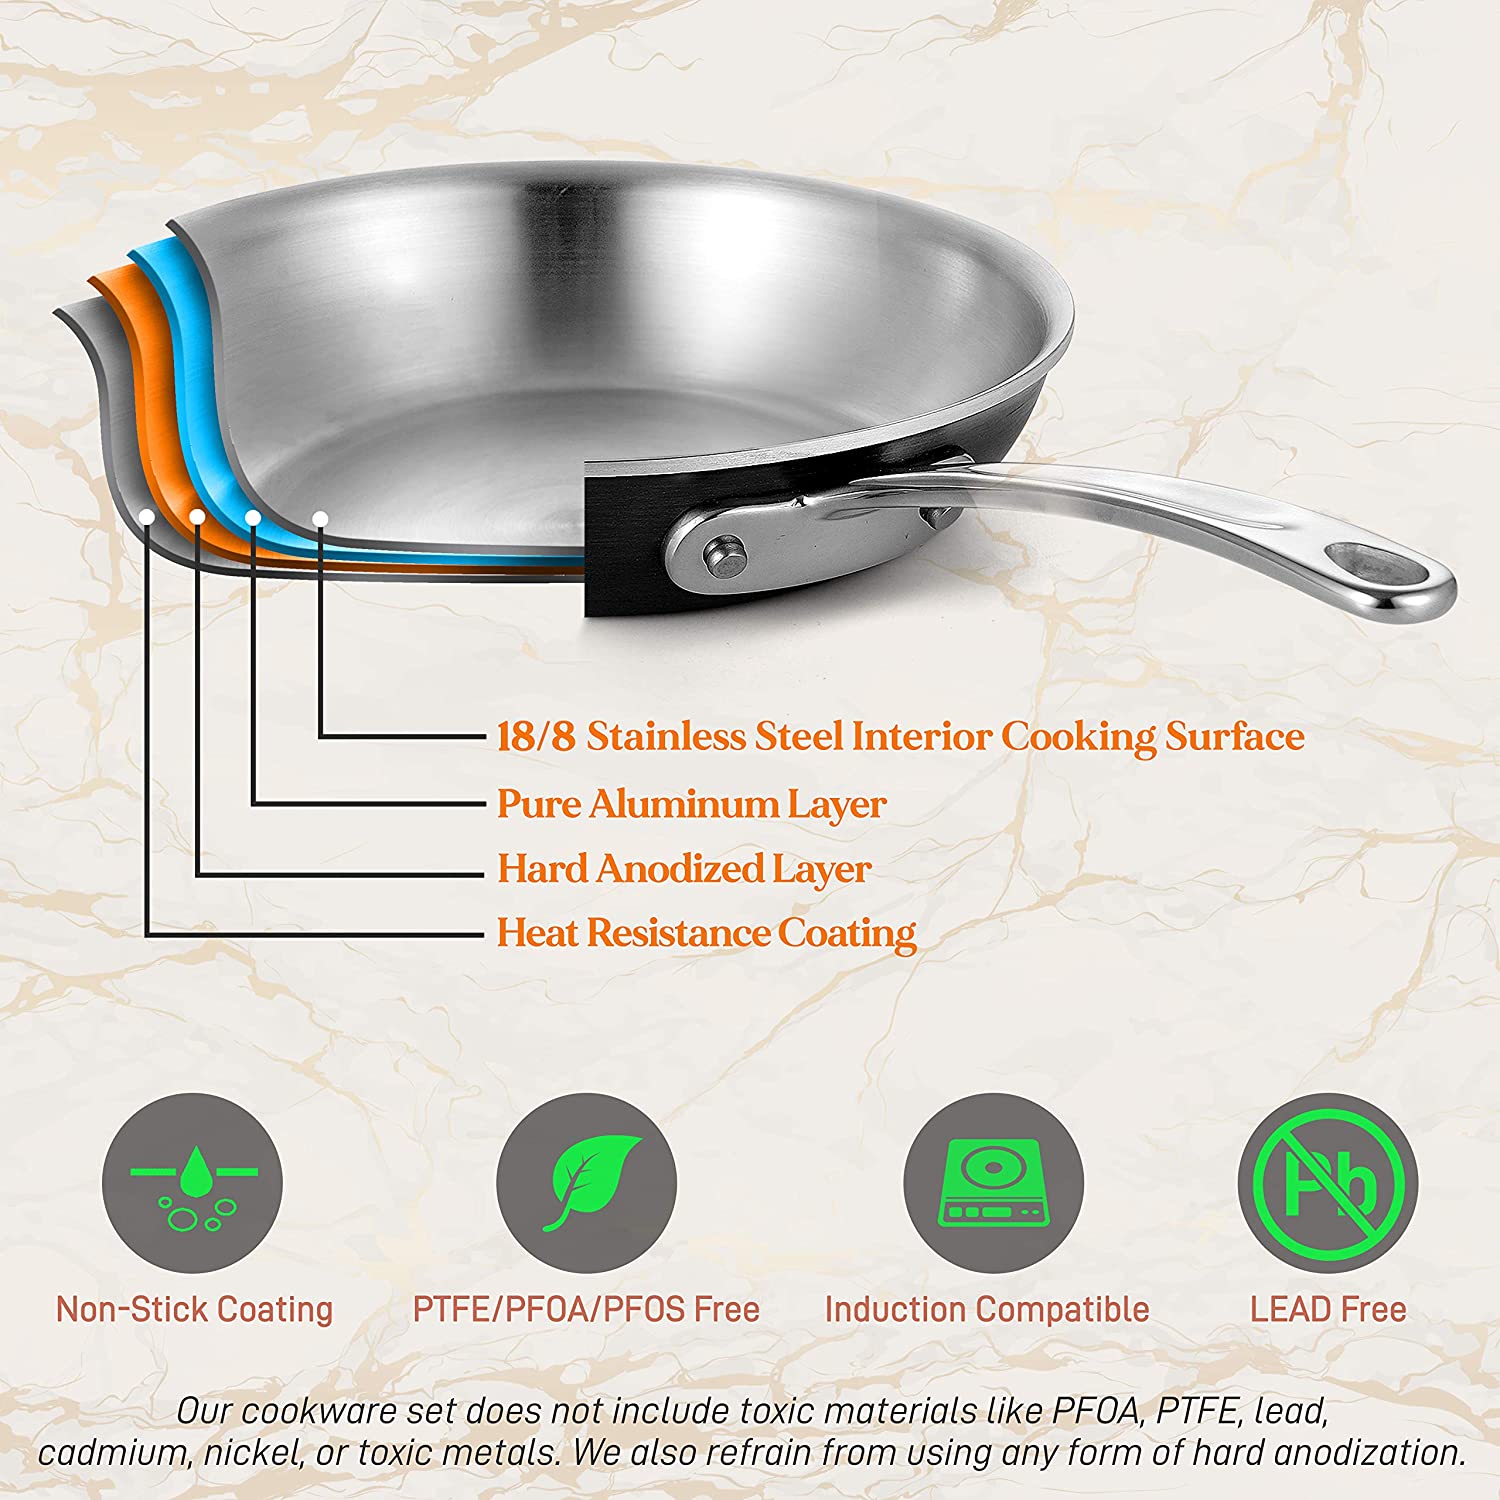 NutriChef Cookware Pots and Pans